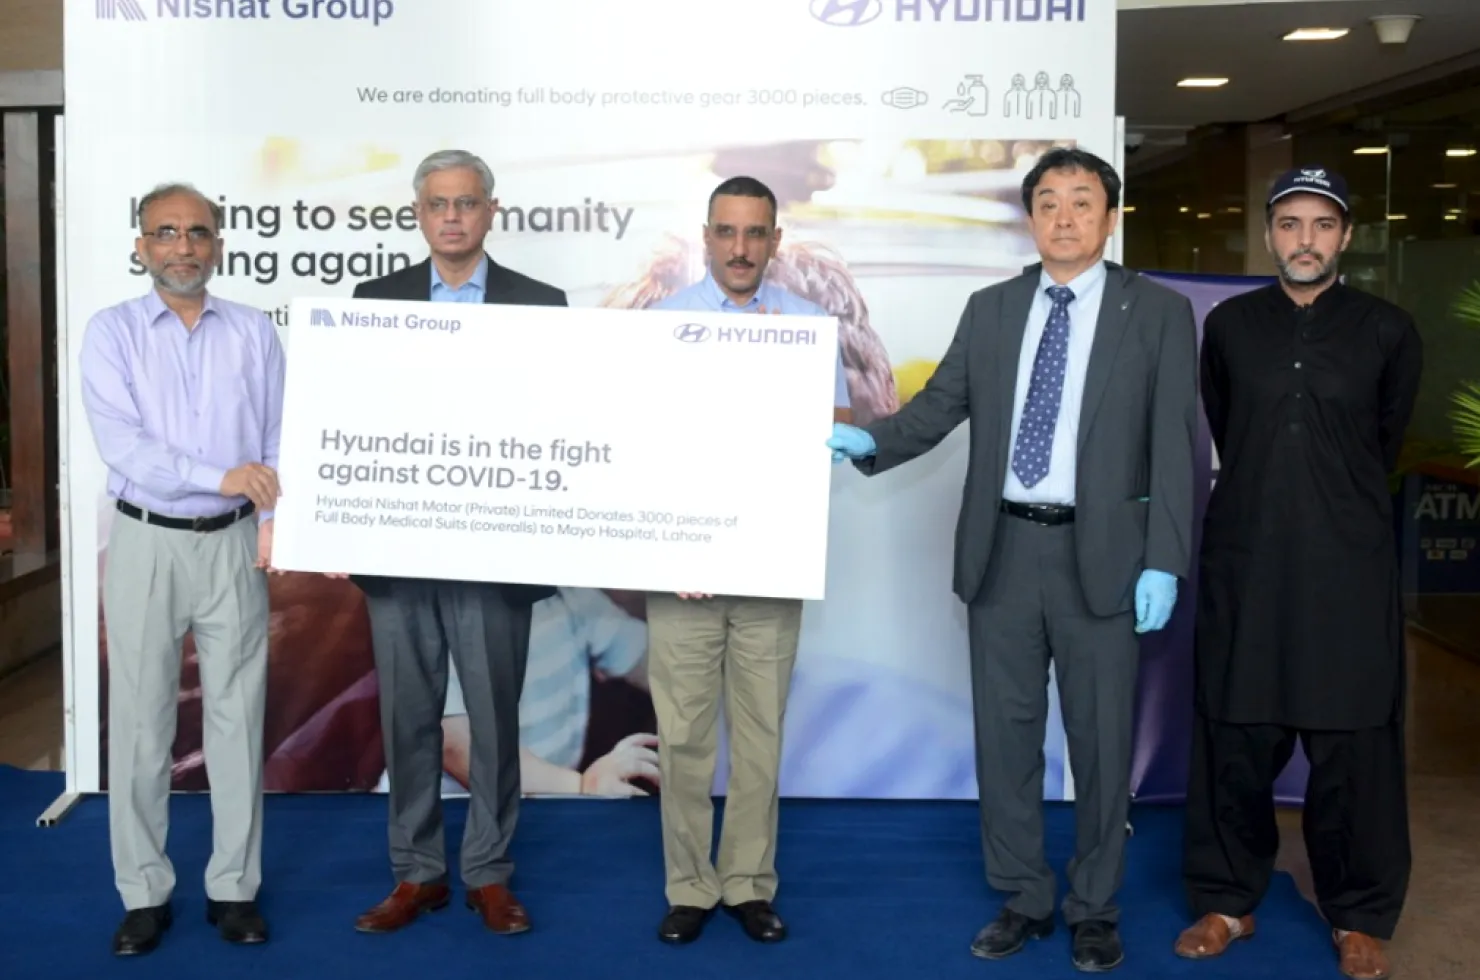 Hyundai donates 3,000 protective suits to Pakistan to help fight COVID-19